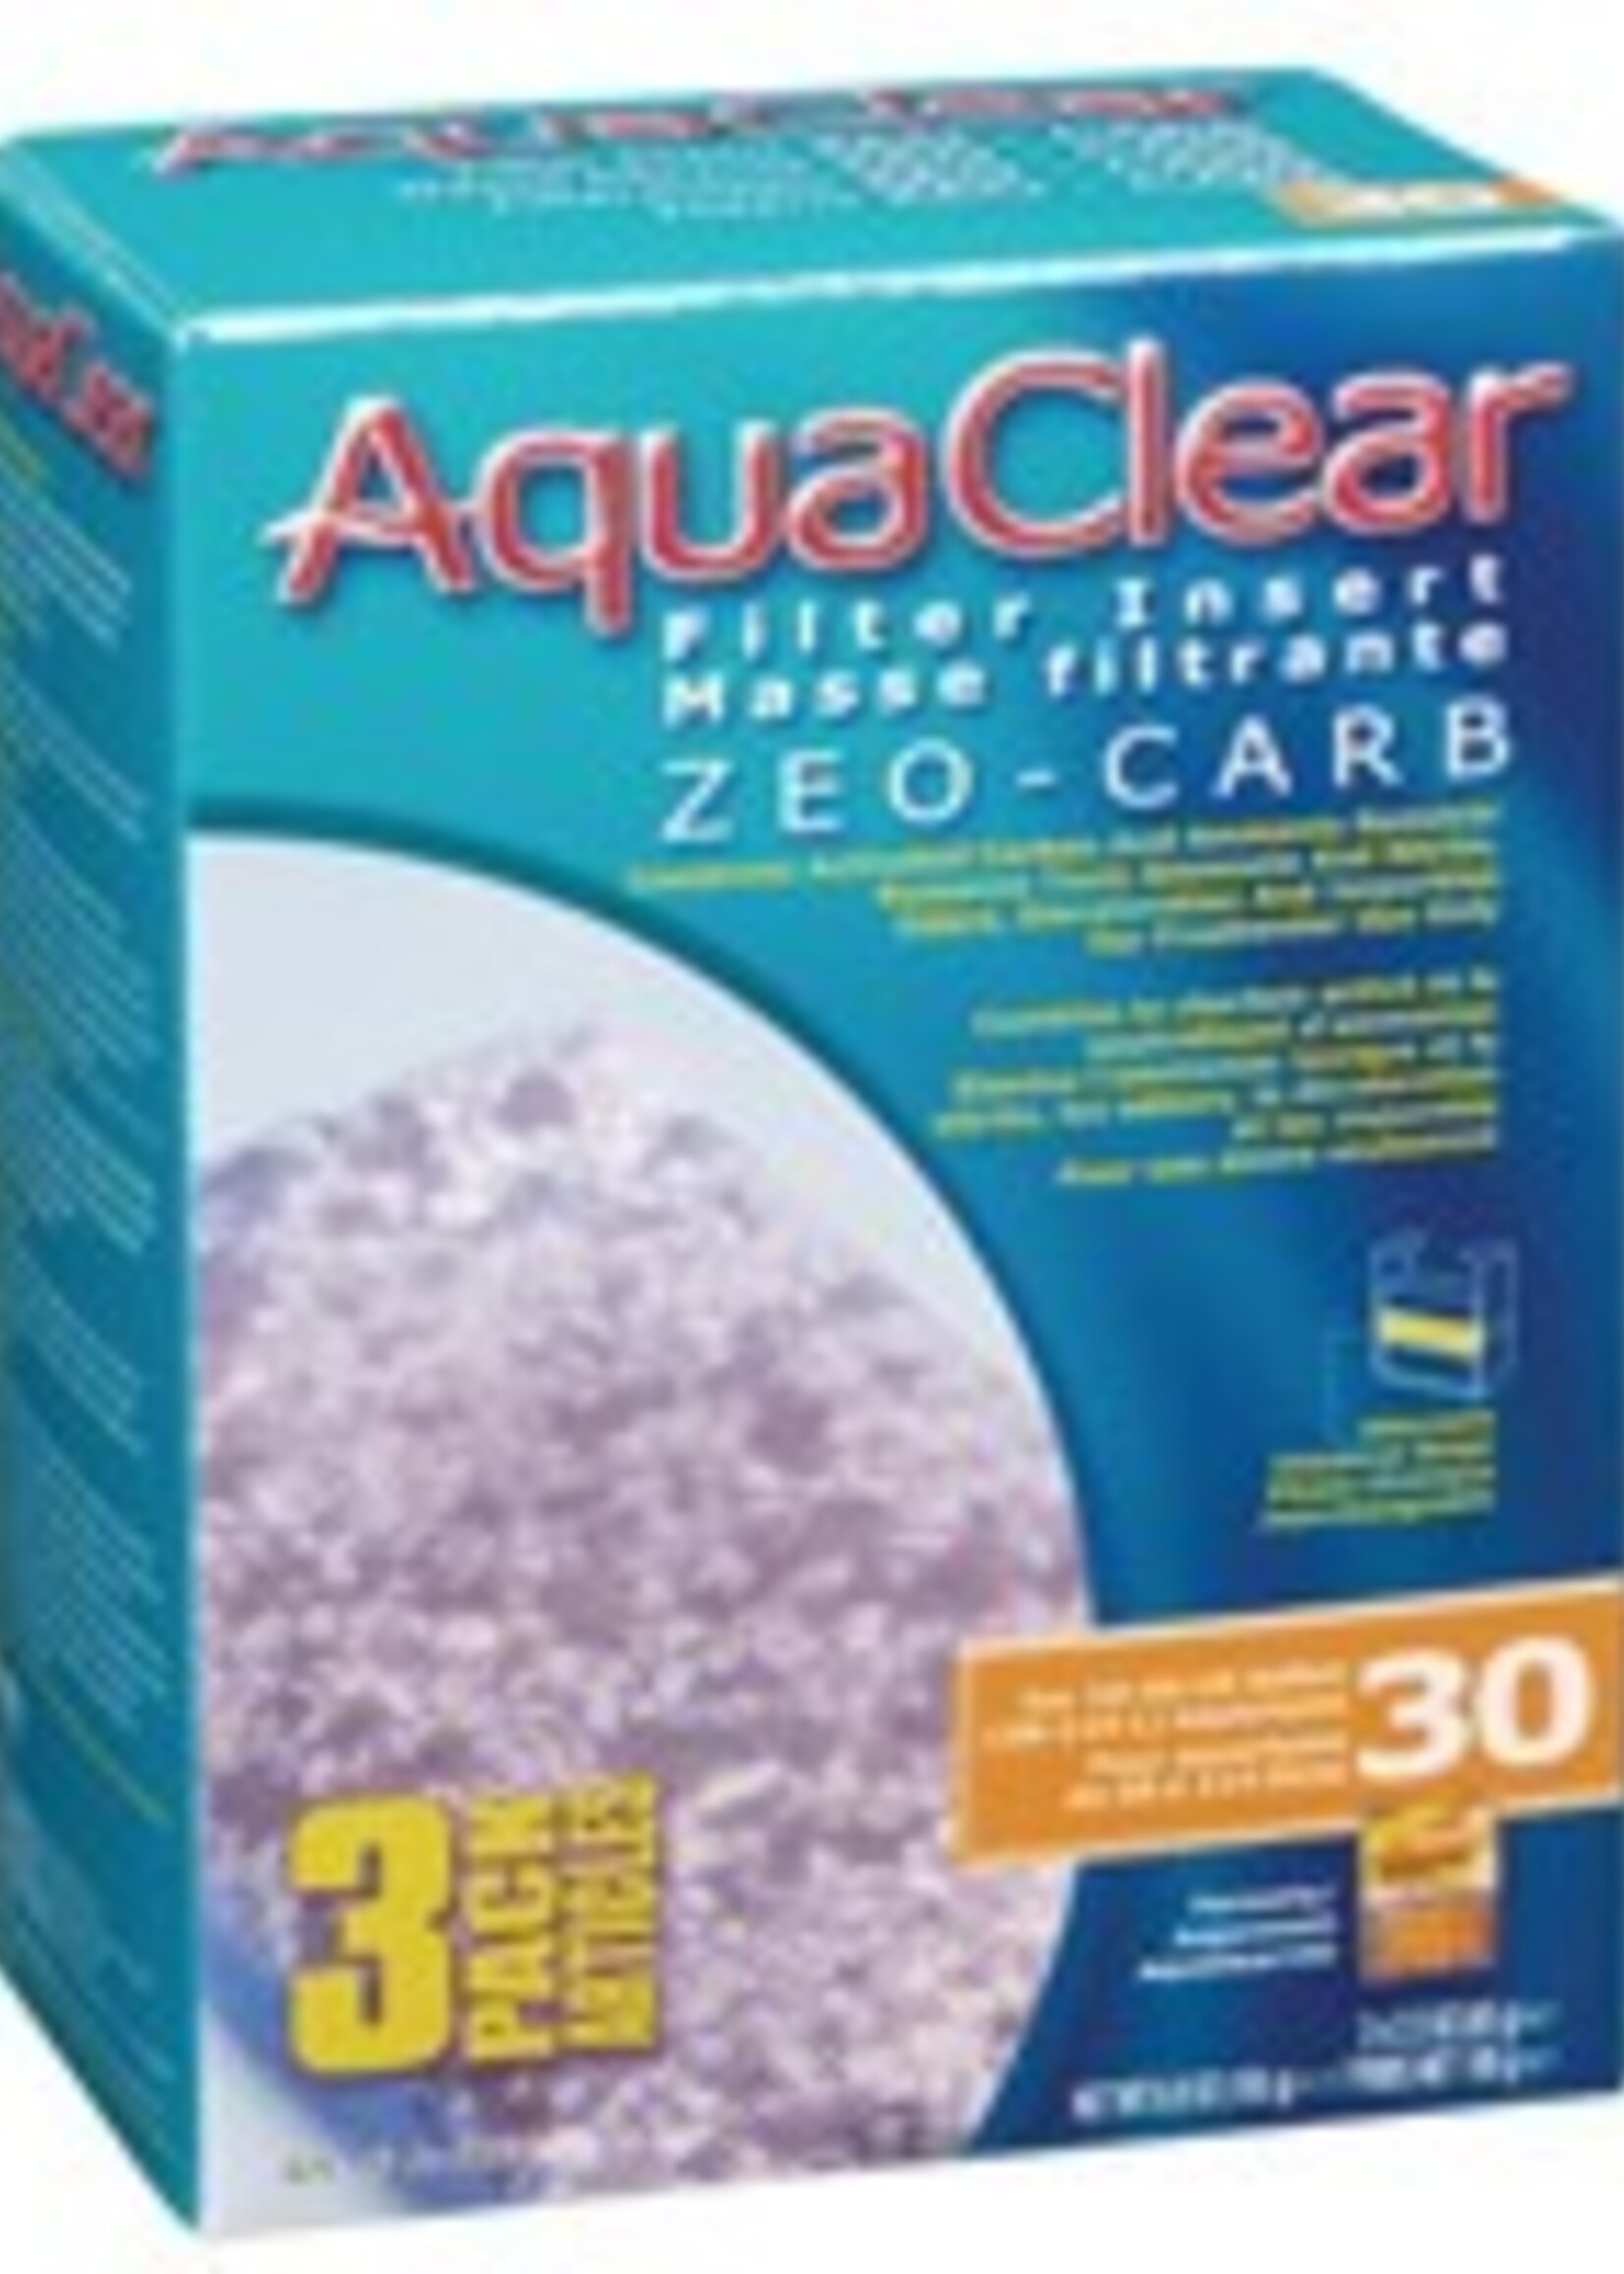 AquaClear 30 Zeo-Carb Filter insert, 3 pack, 195 g (6.9 oz )